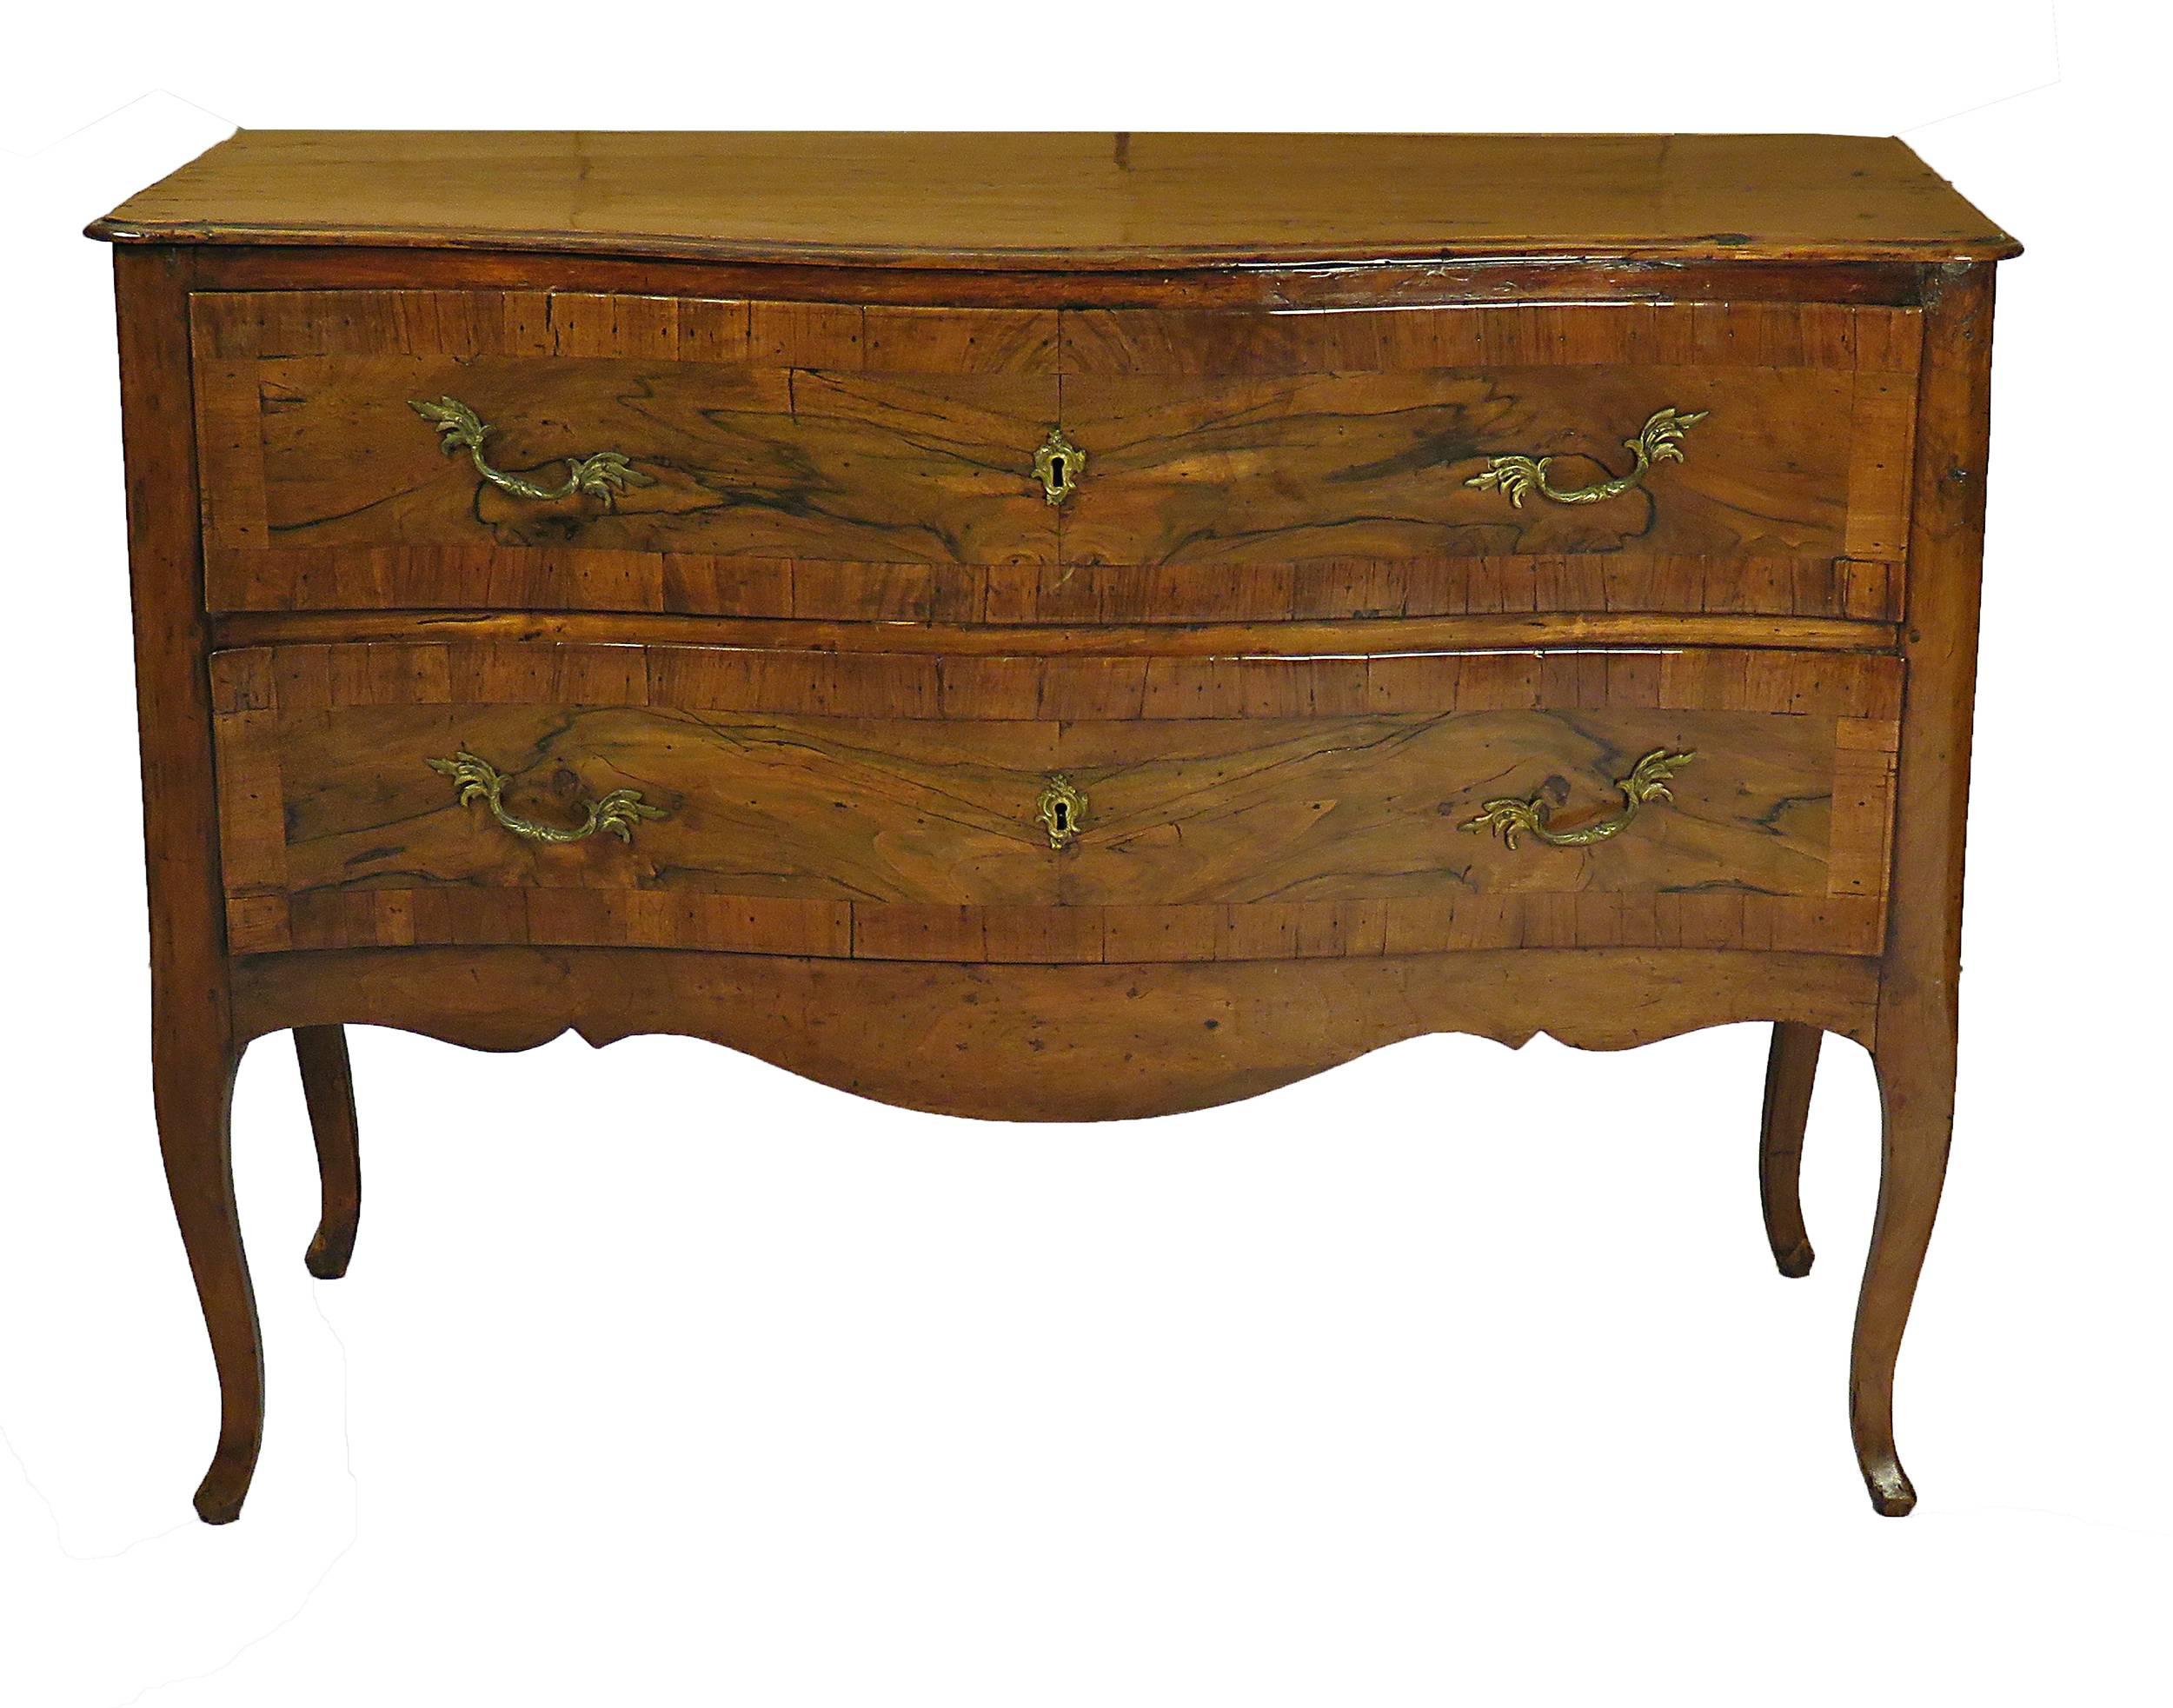 An early 19th century Italian two-drawer serpentine walnut commode, circa 1800. Nice mellow color with a good old surface. Particularly nicely carved cabriole legs.